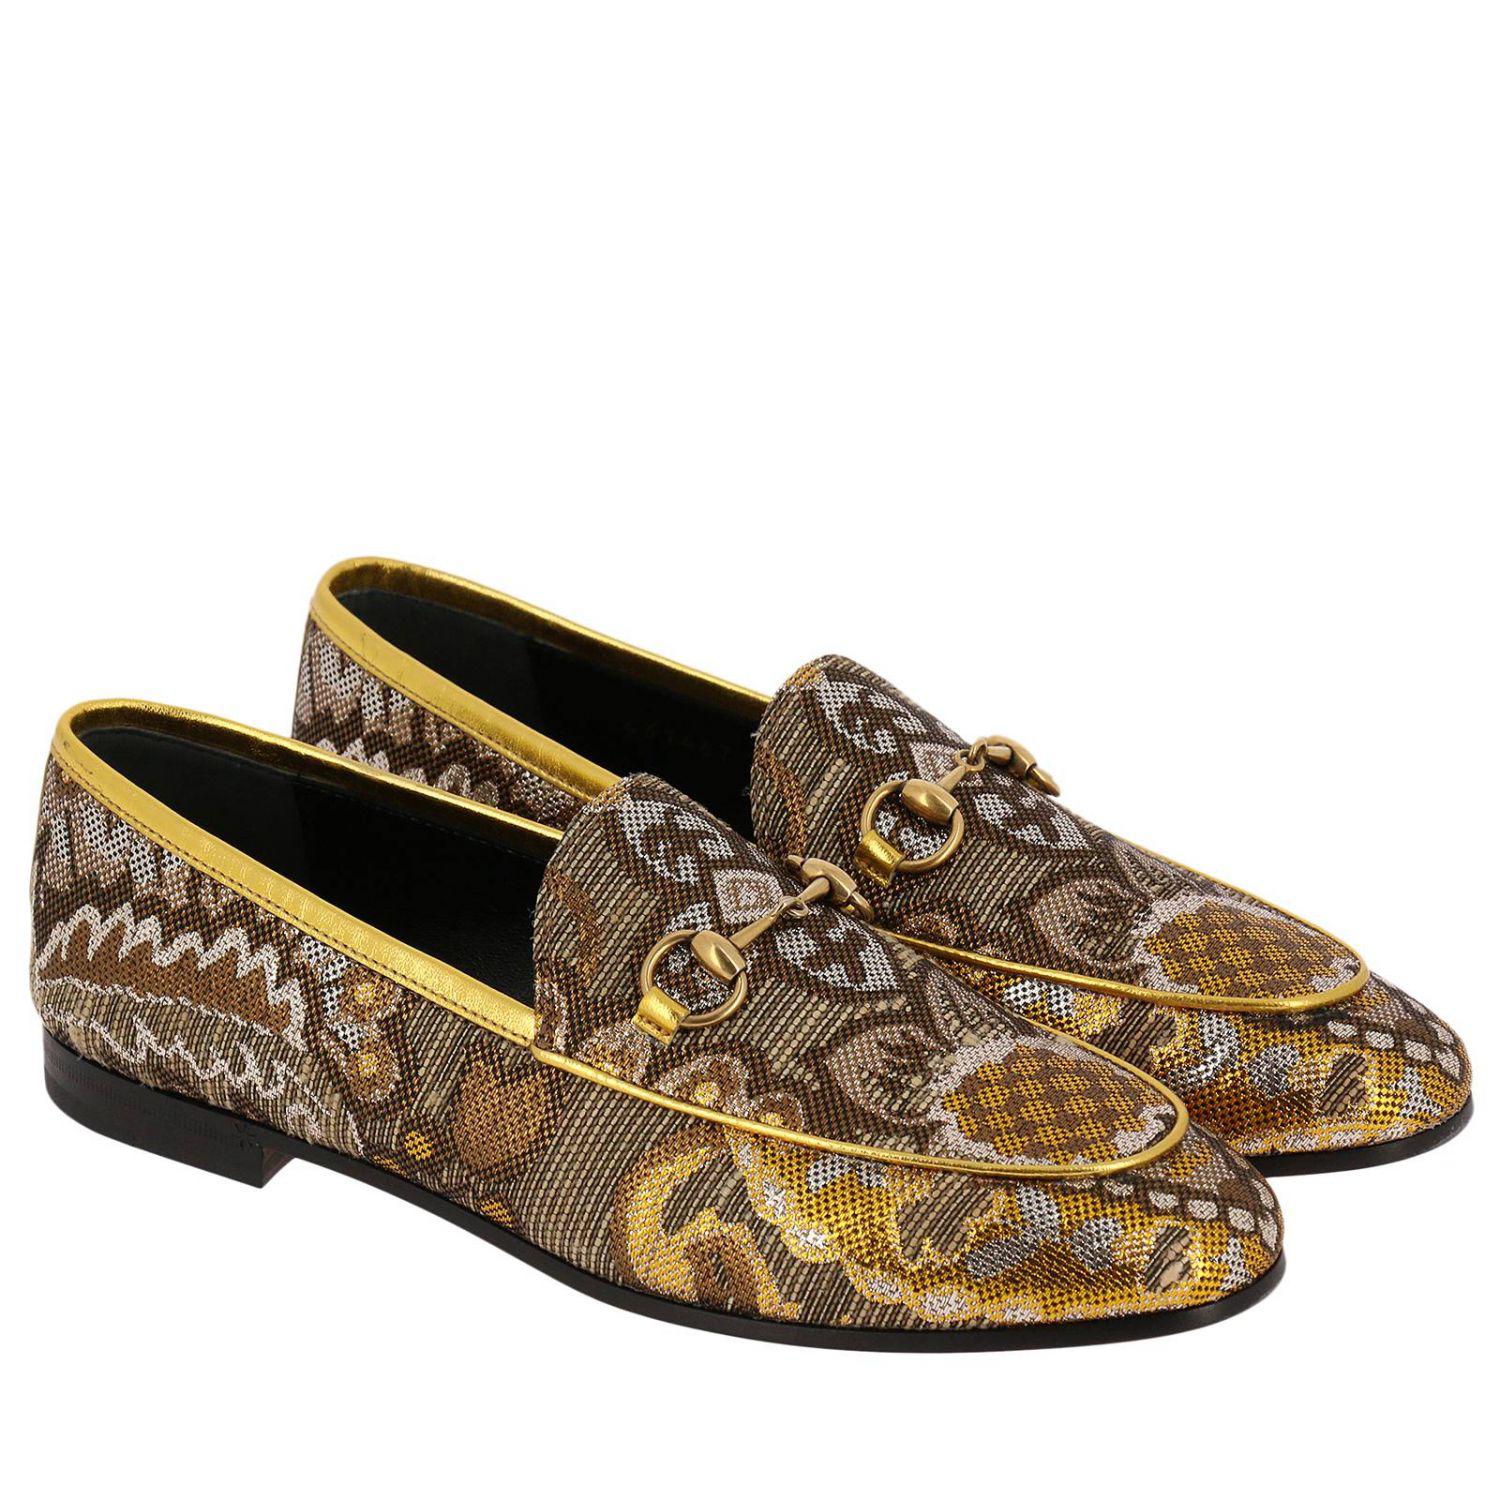 Gucci Loafers Shoes Women in Metallic - Lyst